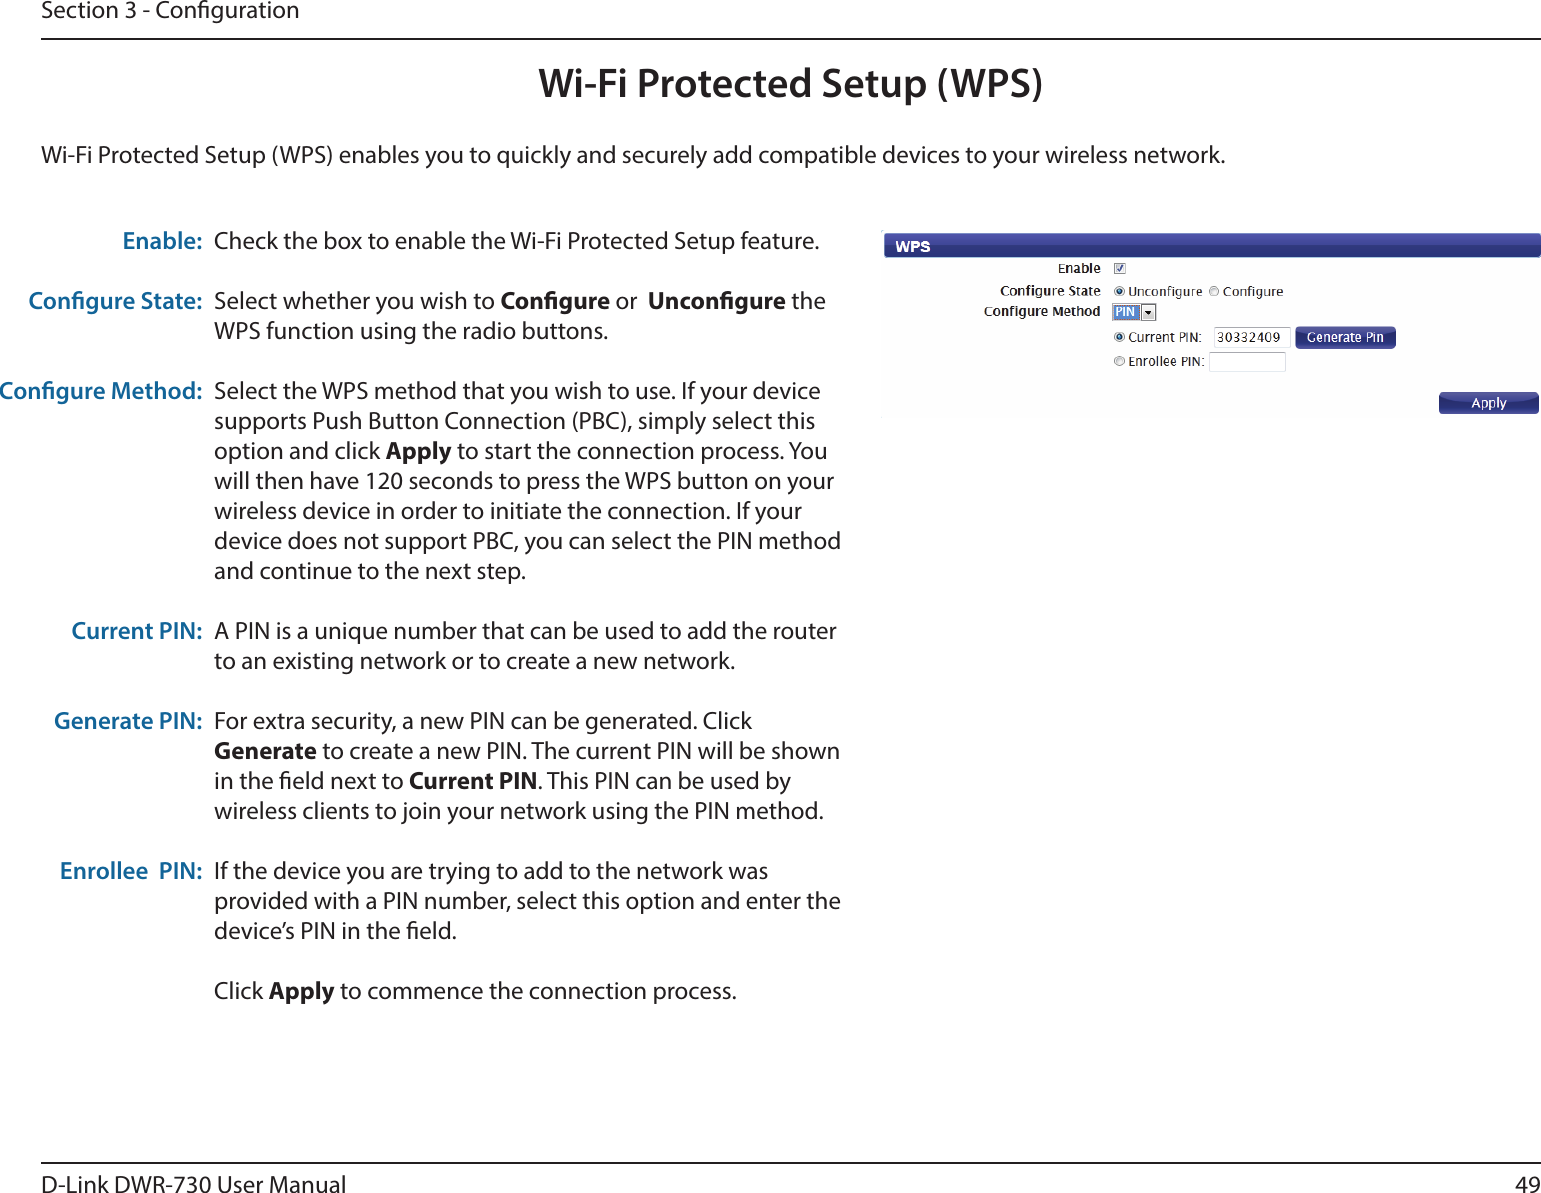 49D-Link DWR-730 User ManualSection 3 - CongurationWi-Fi Protected Setup (WPS)Check the box to enable the Wi-Fi Protected Setup feature.Select whether you wish to Congure or  Uncongure the WPS function using the radio buttons.Select the WPS method that you wish to use. If your device supports Push Button Connection (PBC), simply select this option and click Apply to start the connection process. You will then have 120 seconds to press the WPS button on your wireless device in order to initiate the connection. If your device does not support PBC, you can select the PIN method and continue to the next step.A PIN is a unique number that can be used to add the router to an existing network or to create a new network. For extra security, a new PIN can be generated. Click Generate to create a new PIN. The current PIN will be shown in the eld next to Current PIN. This PIN can be used by wireless clients to join your network using the PIN method.If the device you are trying to add to the network was provided with a PIN number, select this option and enter the device’s PIN in the eld. Click Apply to commence the connection process. Enable:Congure State:Congure Method:Current PIN:Generate PIN:Enrollee  PIN:Wi-Fi Protected Setup (WPS) enables you to quickly and securely add compatible devices to your wireless network. 